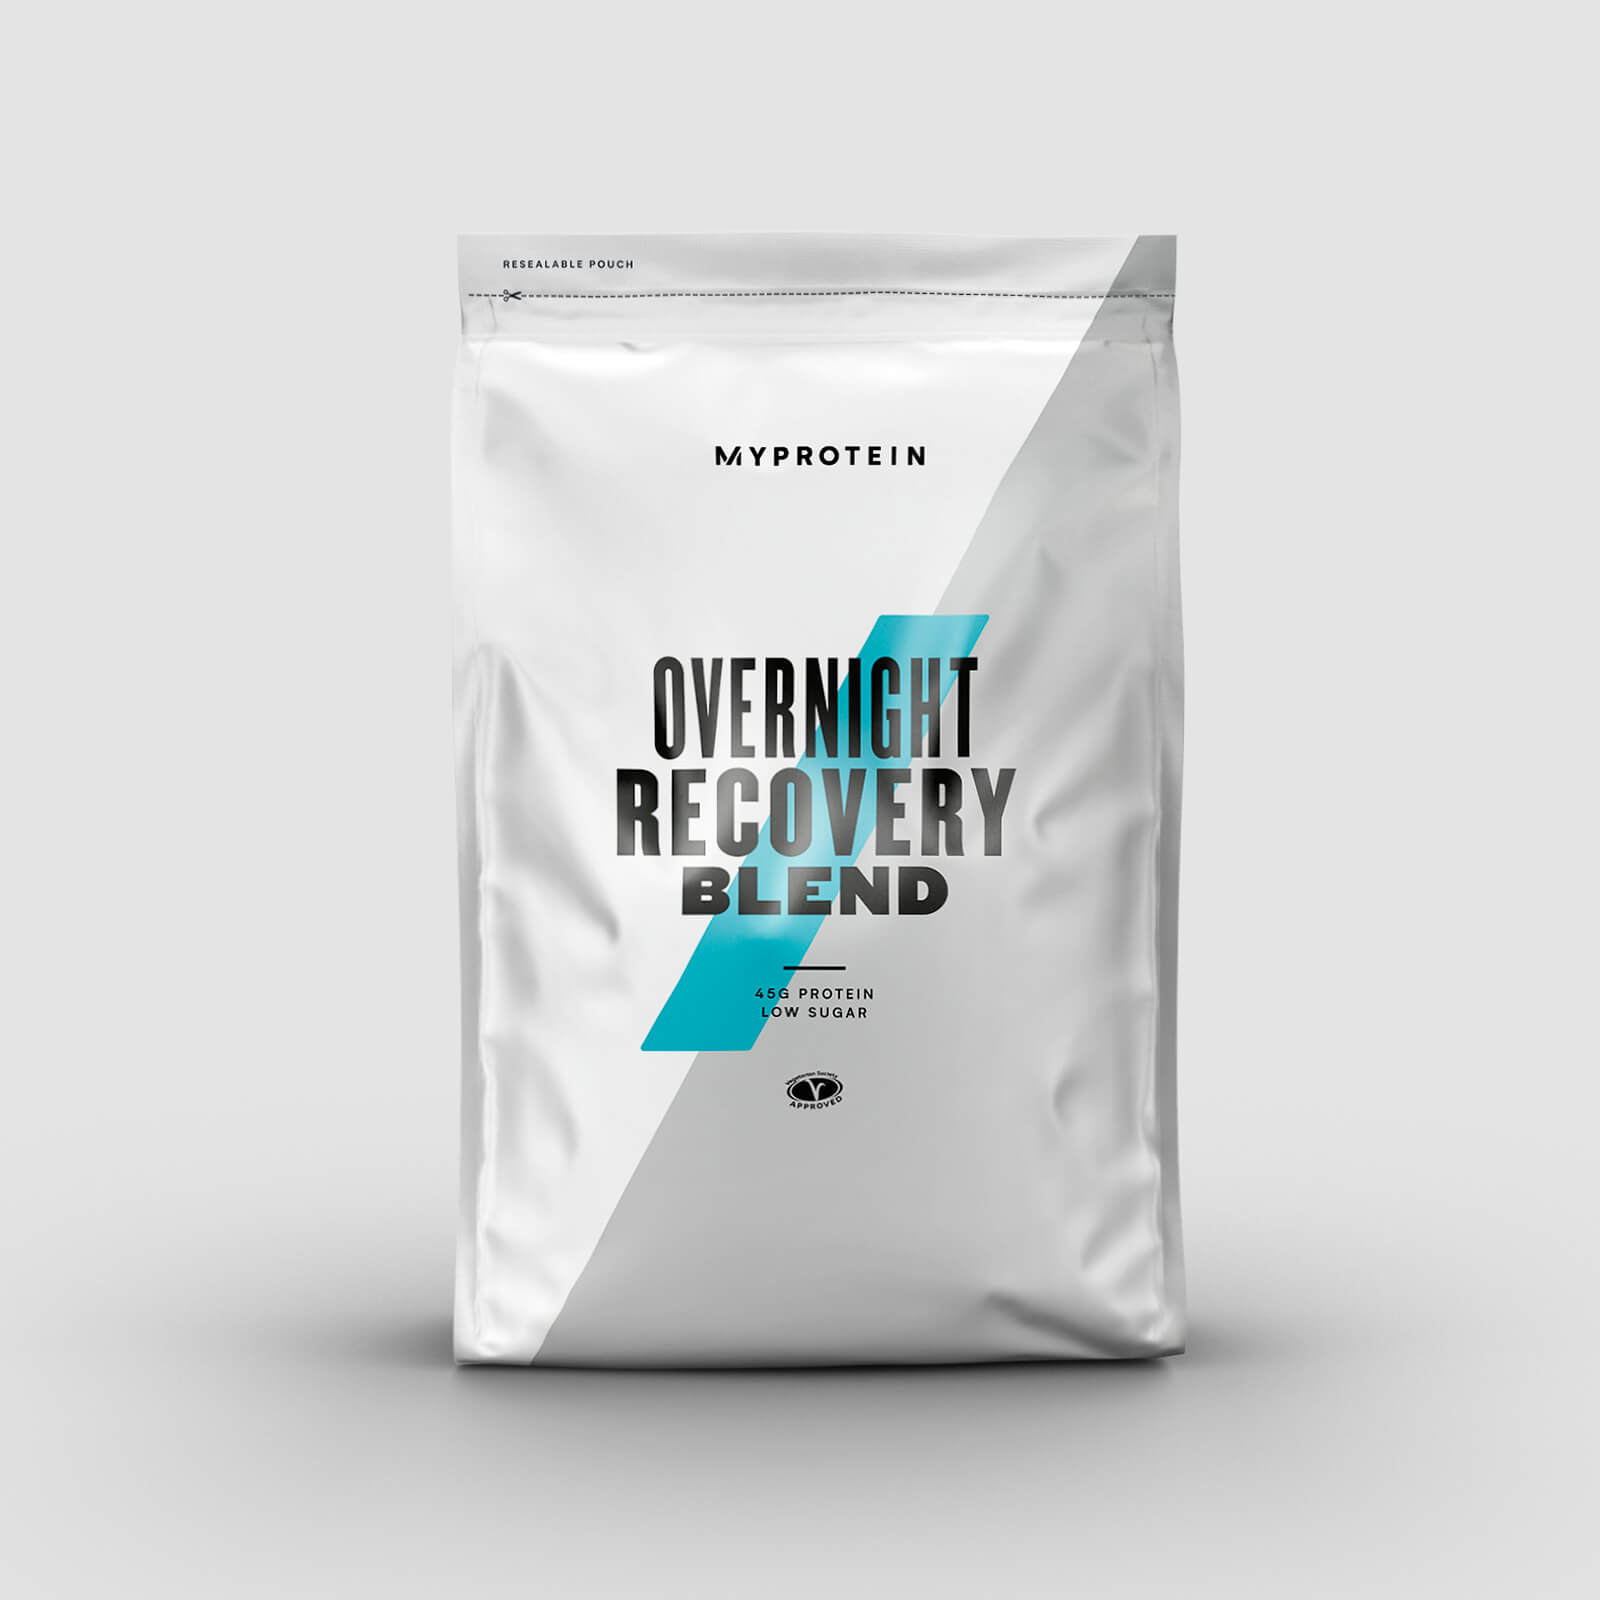 Myprotein Overnight Recovery Blend - 1kg - Strawberry Cream